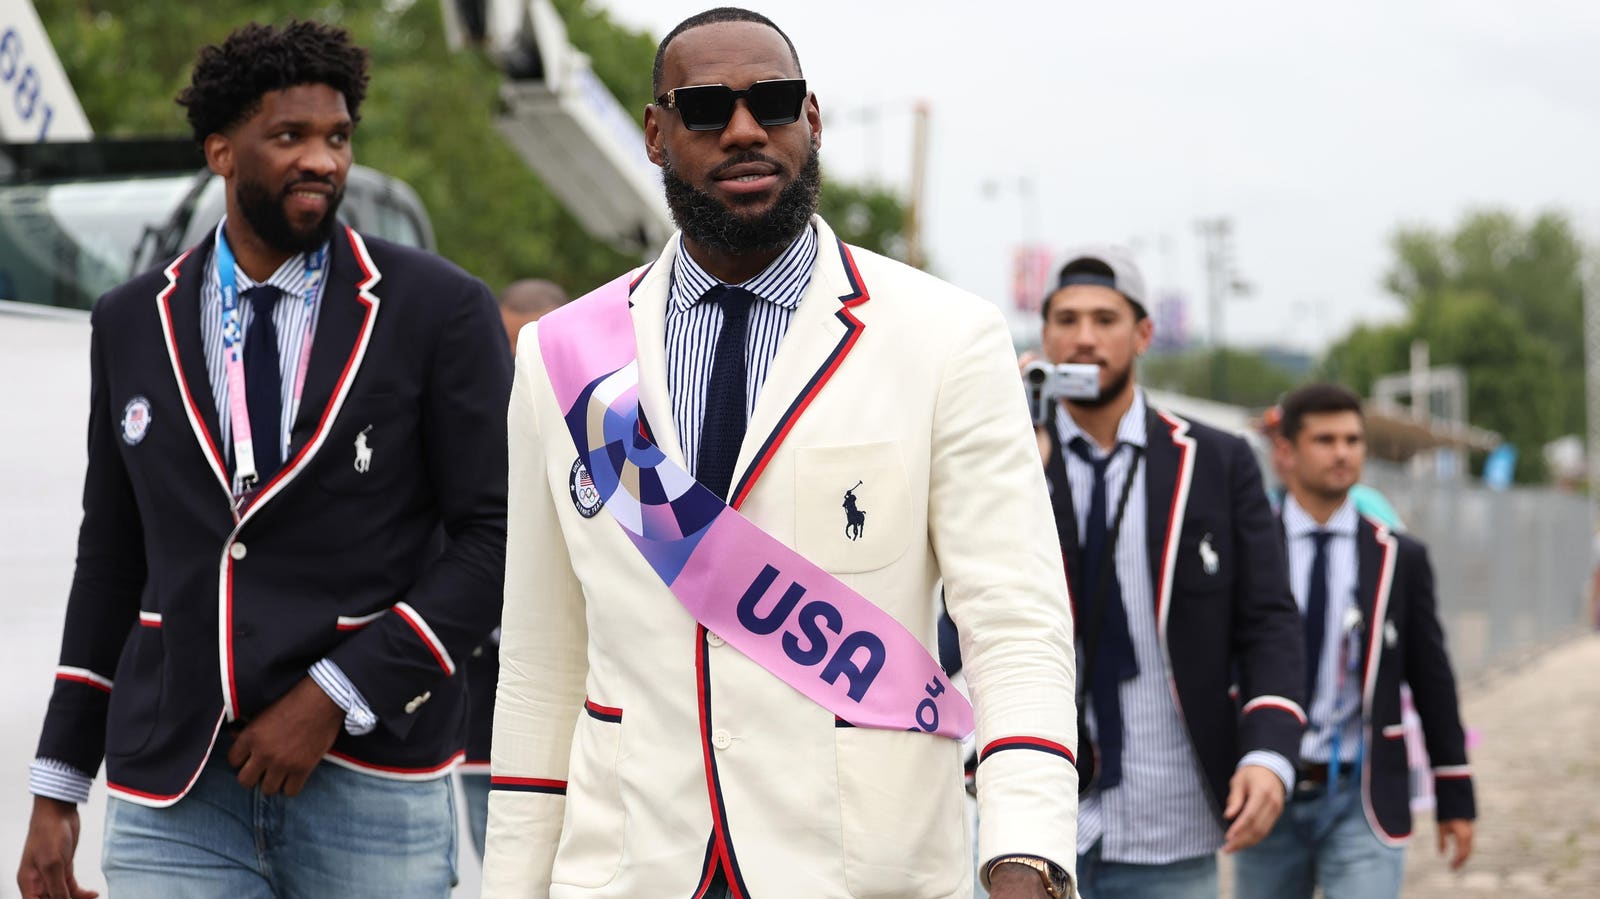 The Best Fashion Moments So Far At The 2024 Summer Olympics